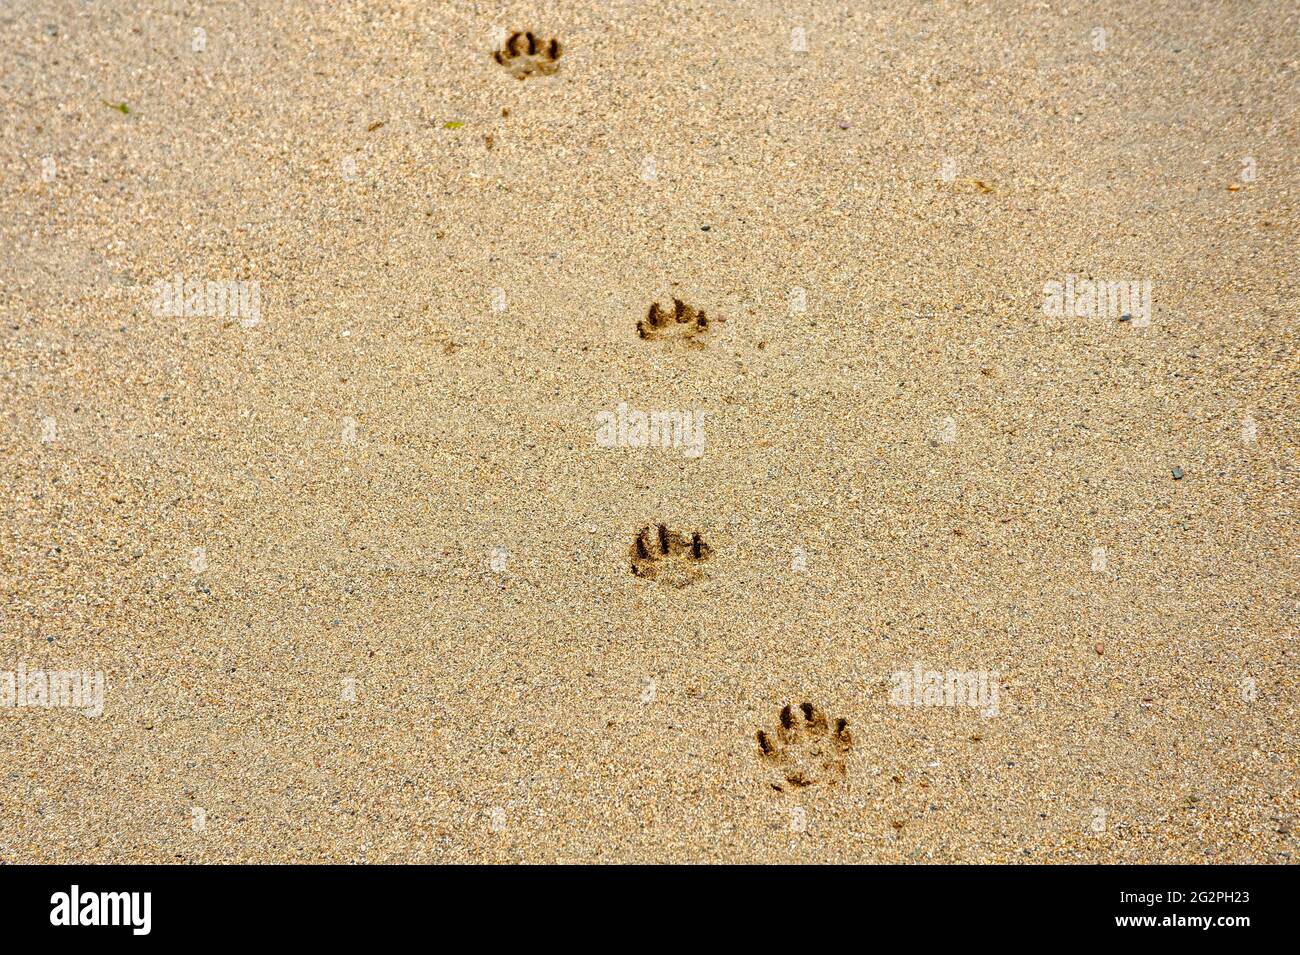 dog paw prints in the sand Stock Photo